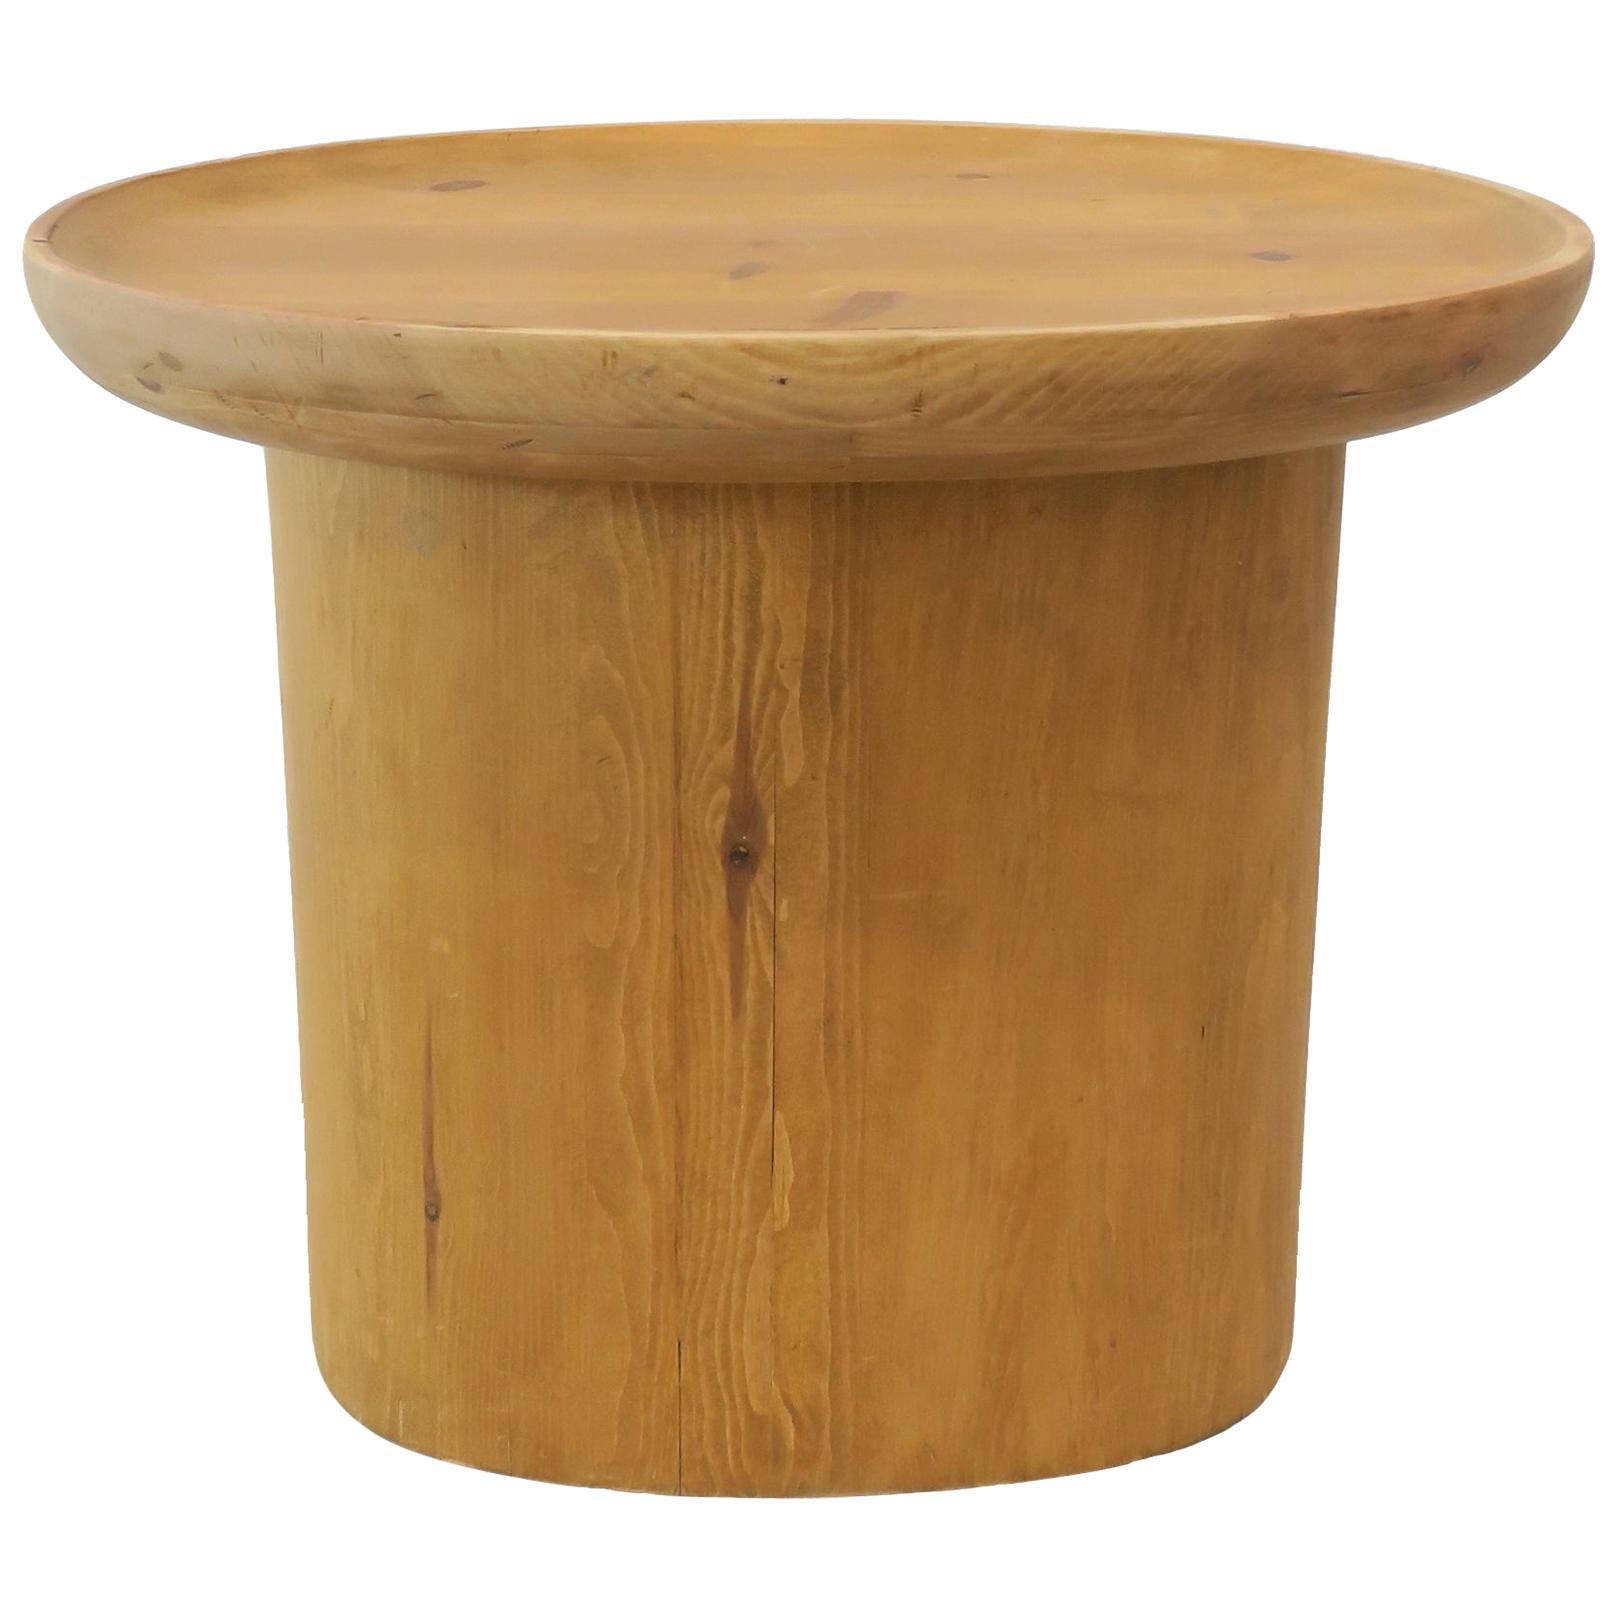 Modern Pine Oval Side Table by Martin and Brockett, in Natural Pine finish